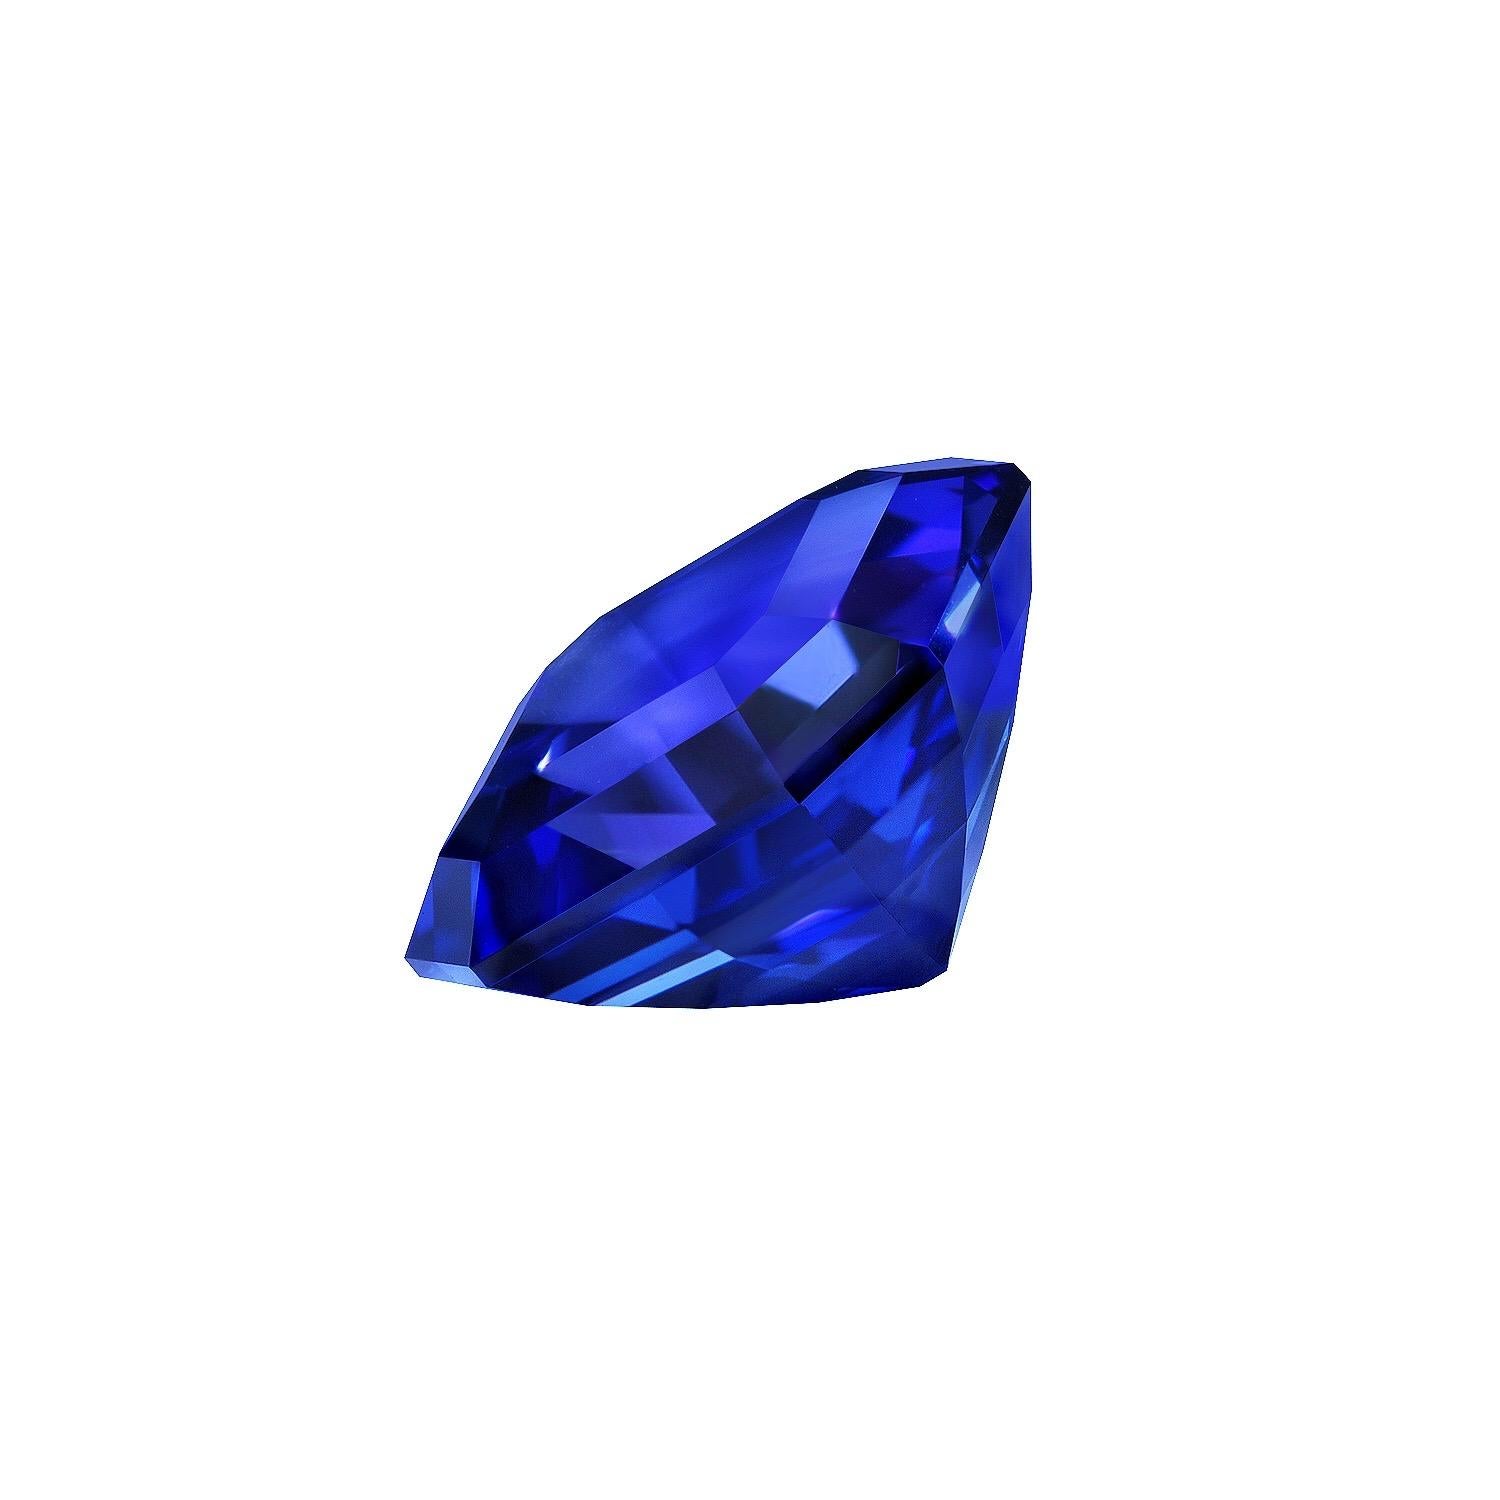 Pristine 5.16 carat Tanzanite emerald cut gem offered loose to a classy lady or gentleman.
Returns are accepted and paid by us within 7 days of delivery.
We offer supreme custom jewelry work upon request. Please contact us for more details.
For your